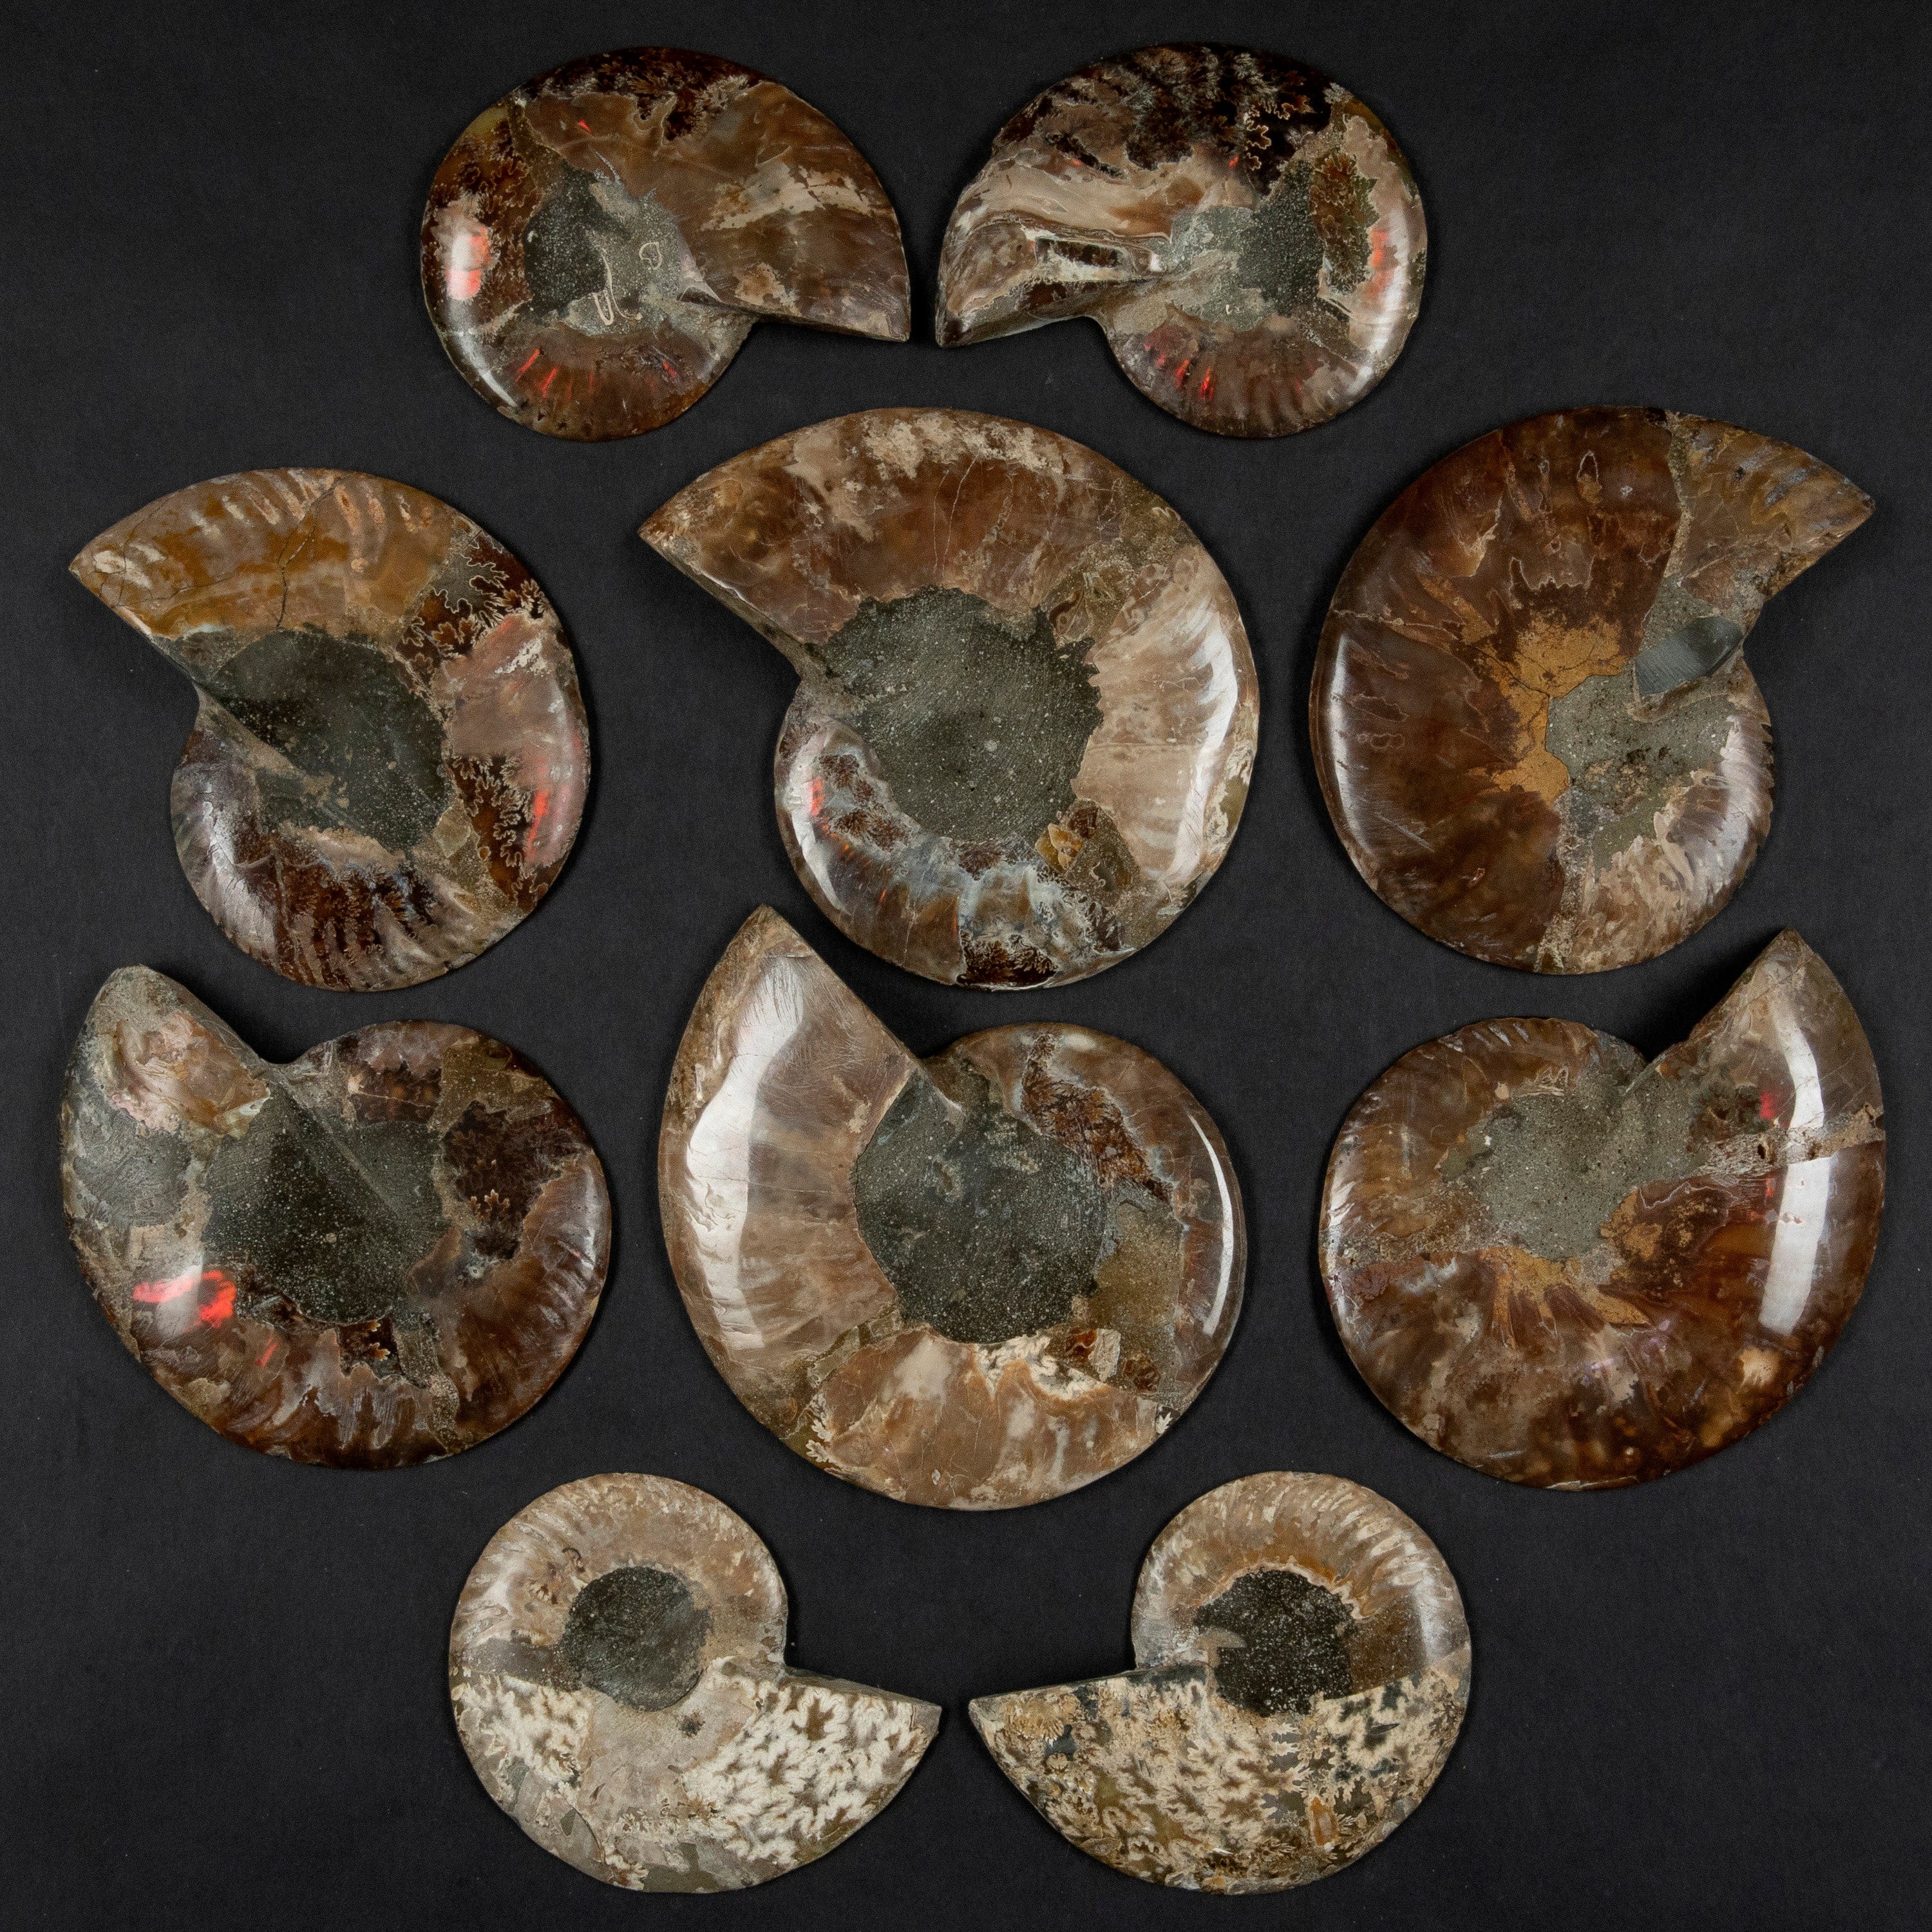 Kalifano Fossils & Minerals Natural Ammonite Pair from Madagascar - 4-6" AMM600